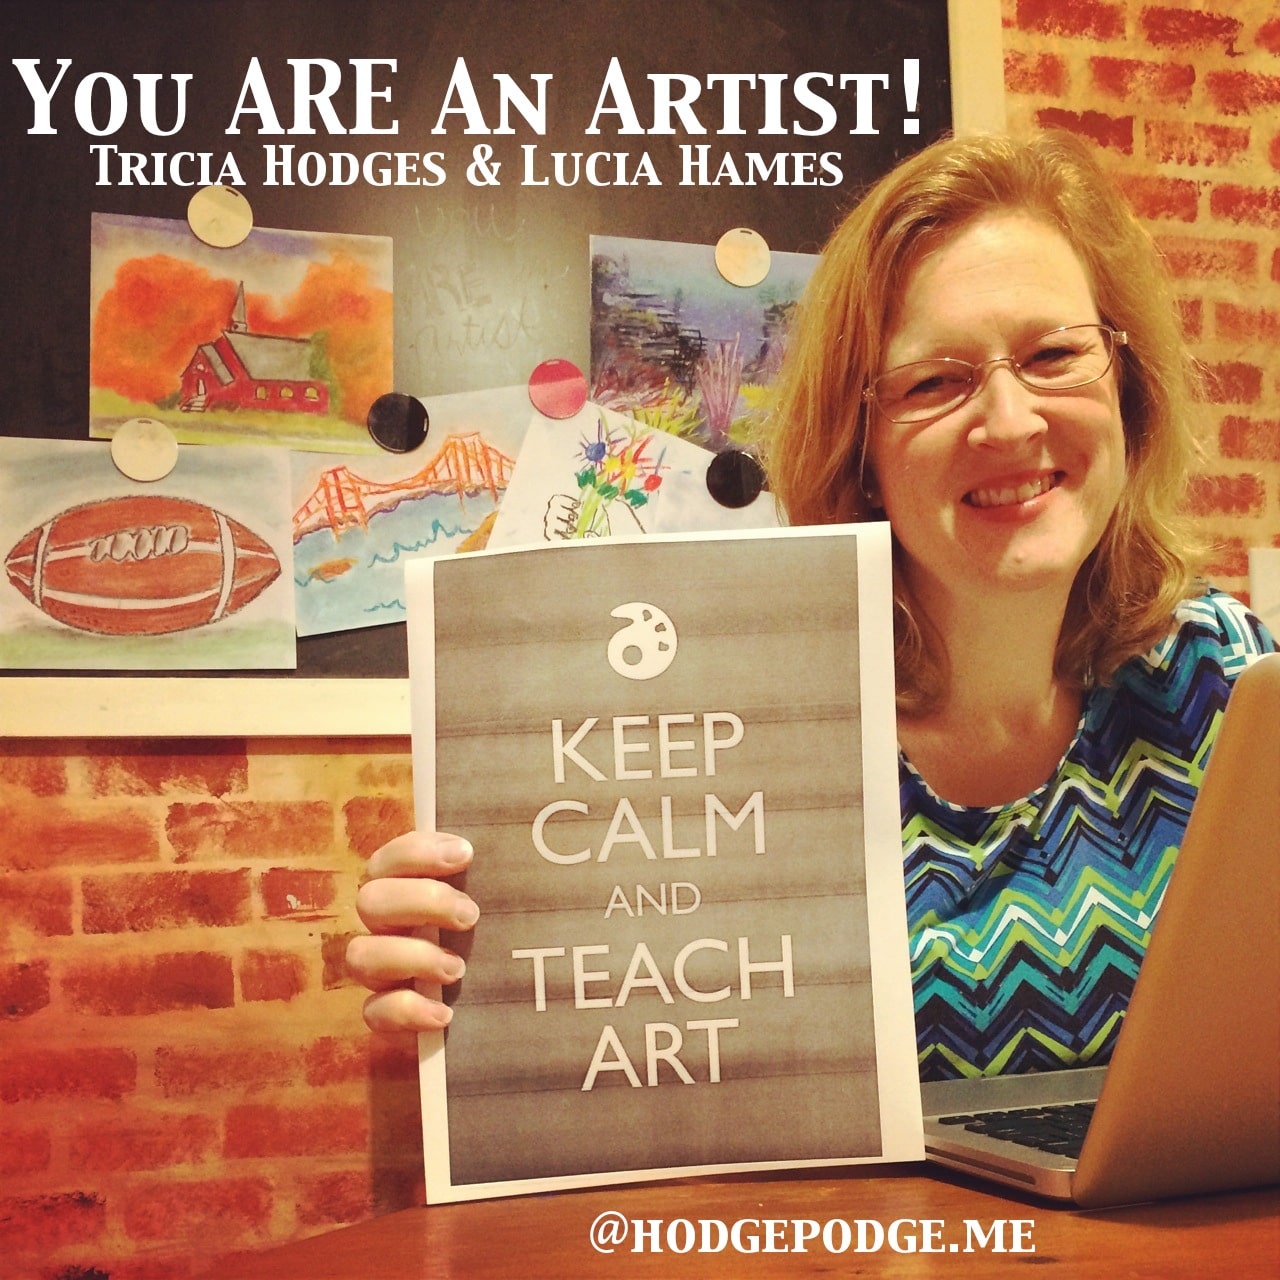 You ARE an Artist!